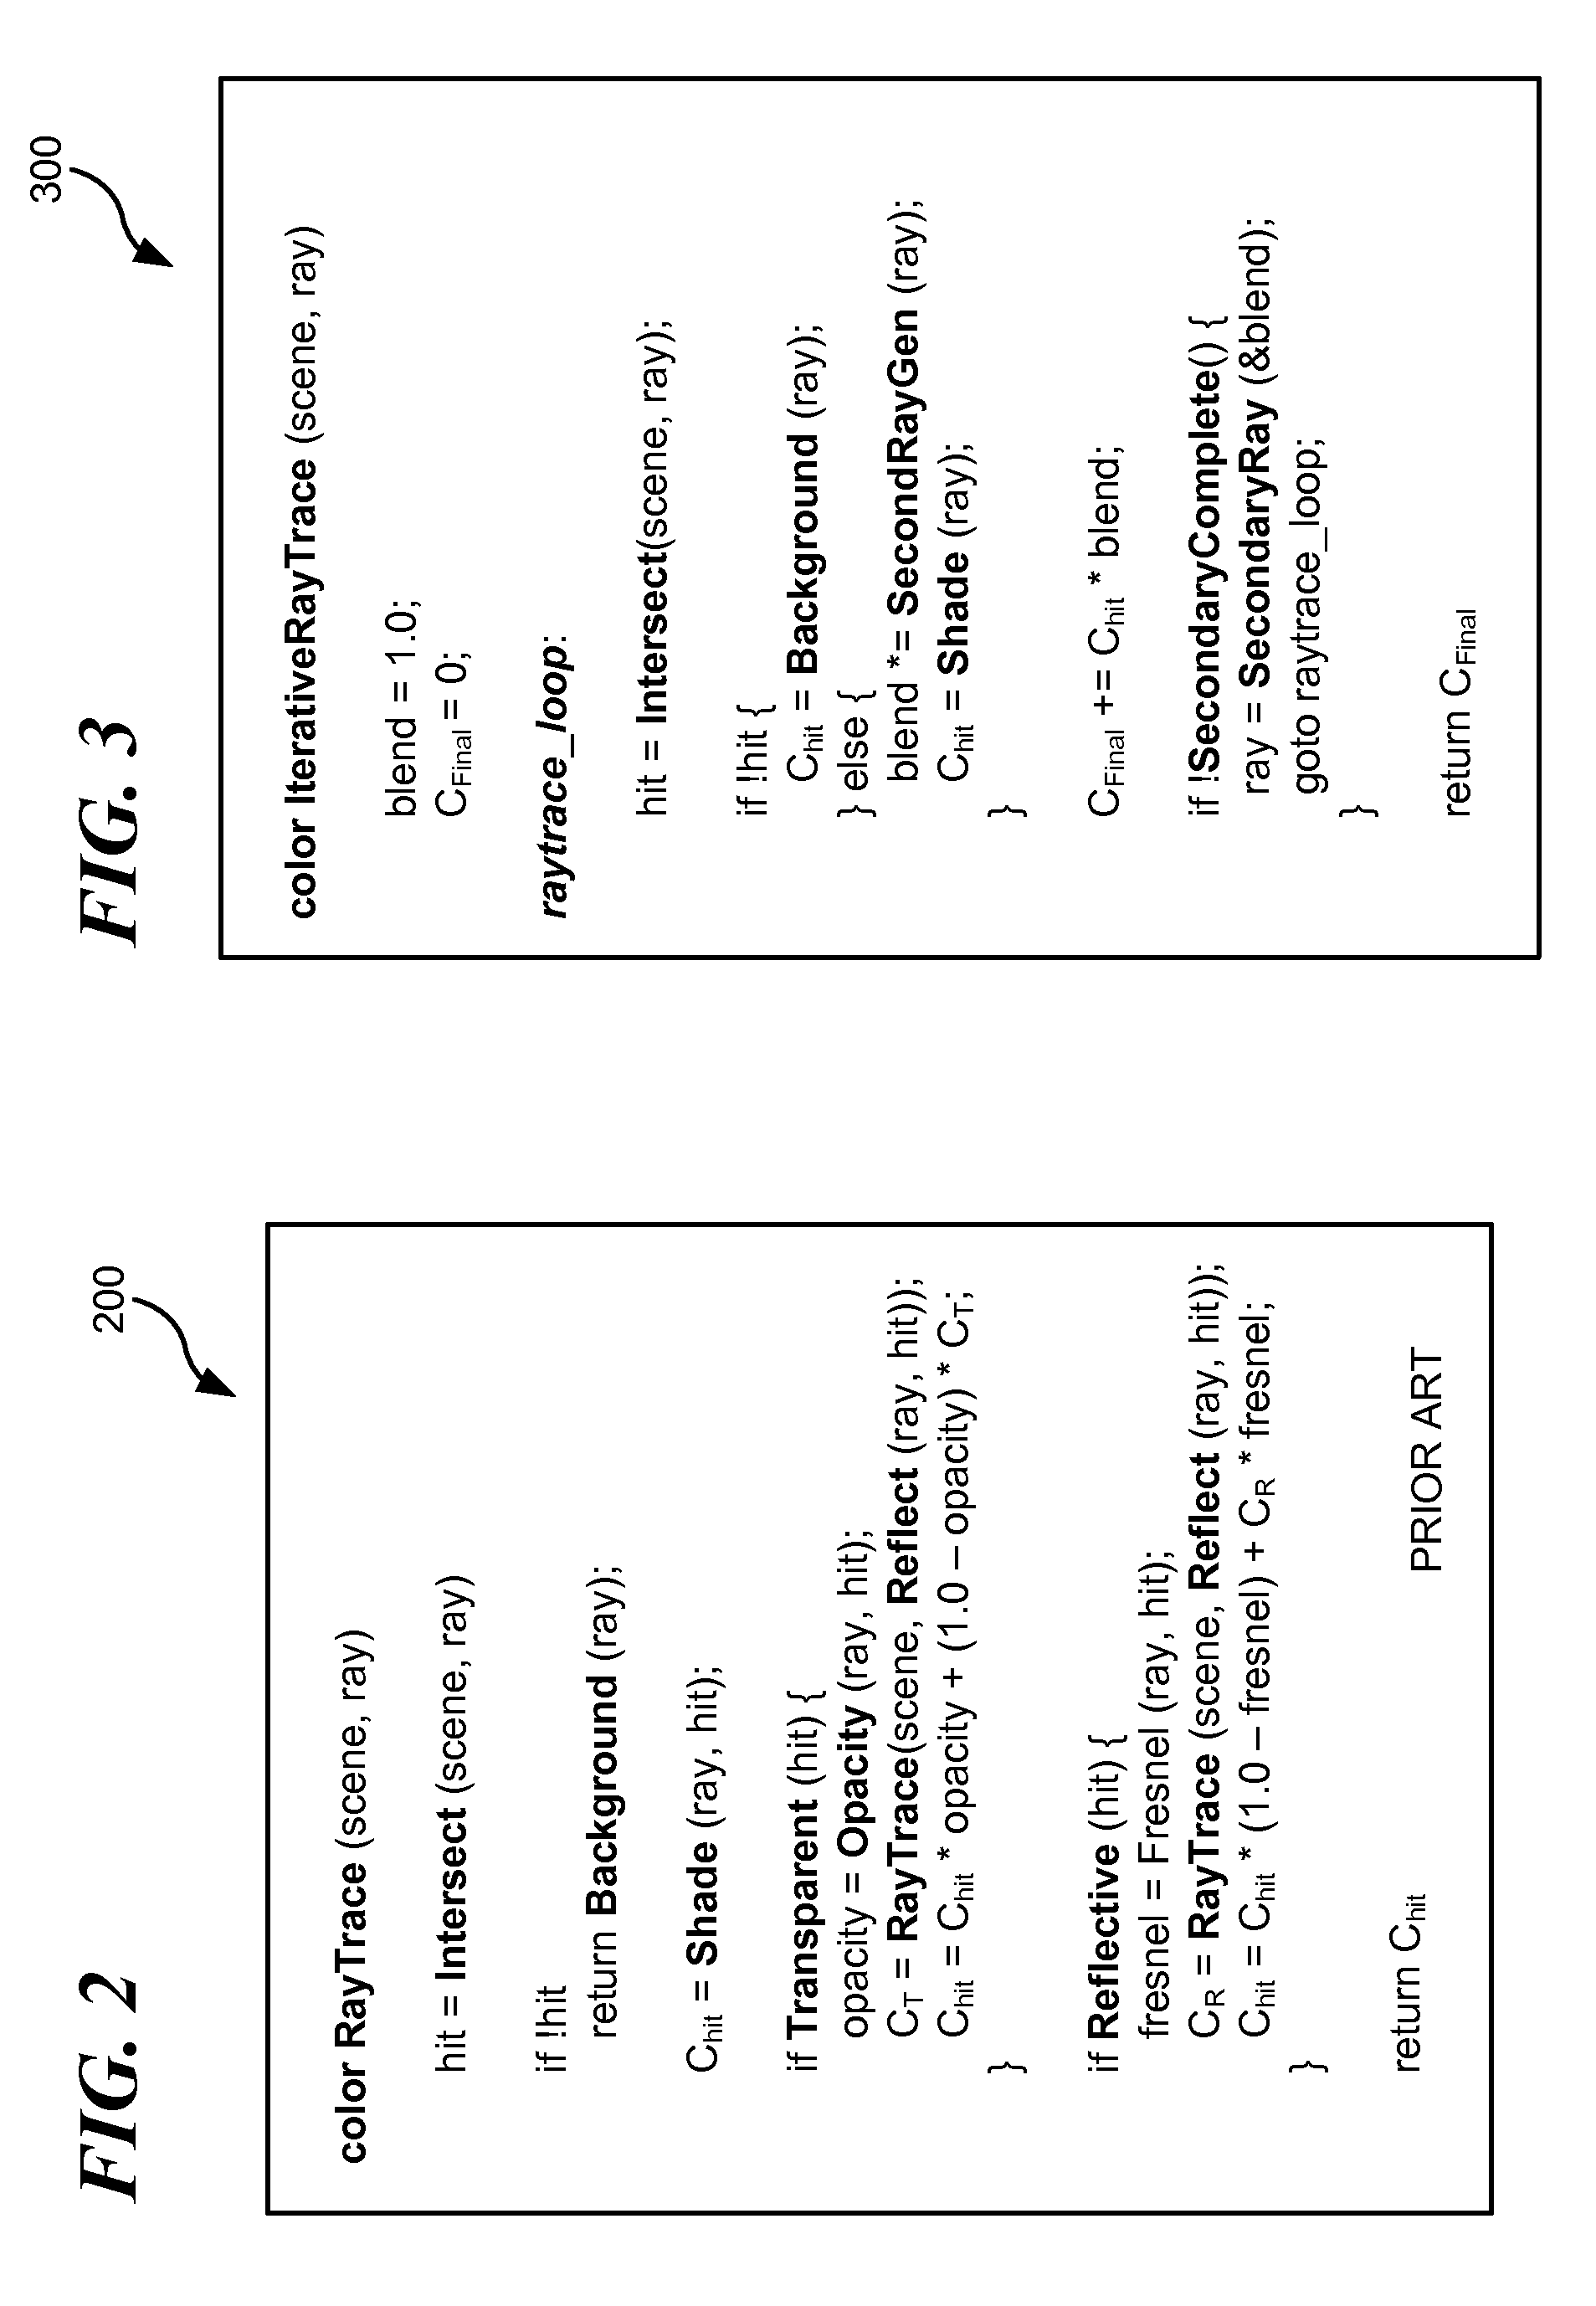 System and Method for Iterative Interactive Ray Tracing in a Multiprocessor Environment